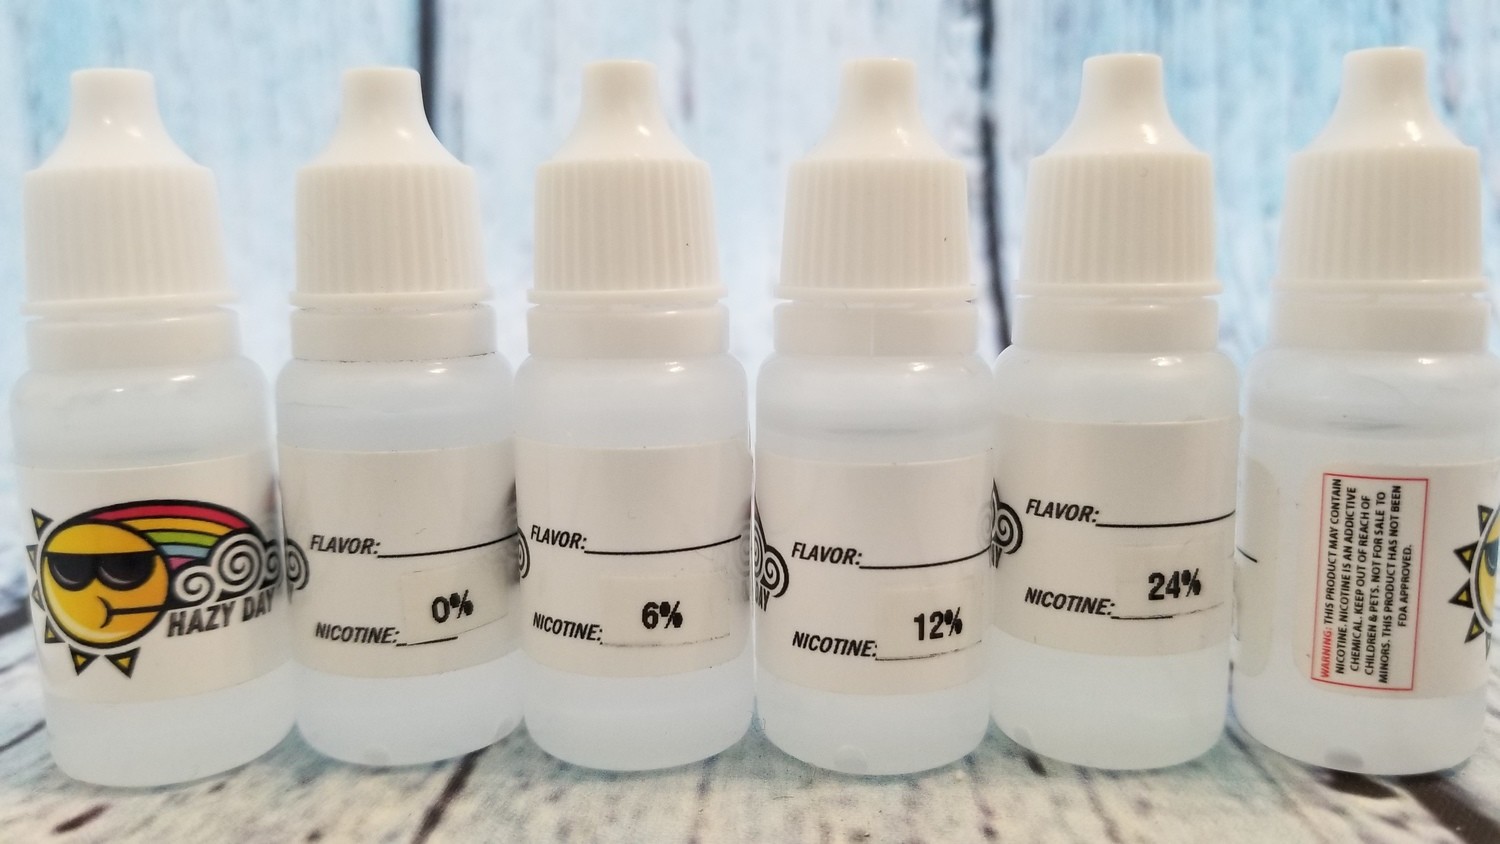 CUSTOM E-JUICE 10ML
OVER 50 FLAVORS TO CHOOSE FROM!!!